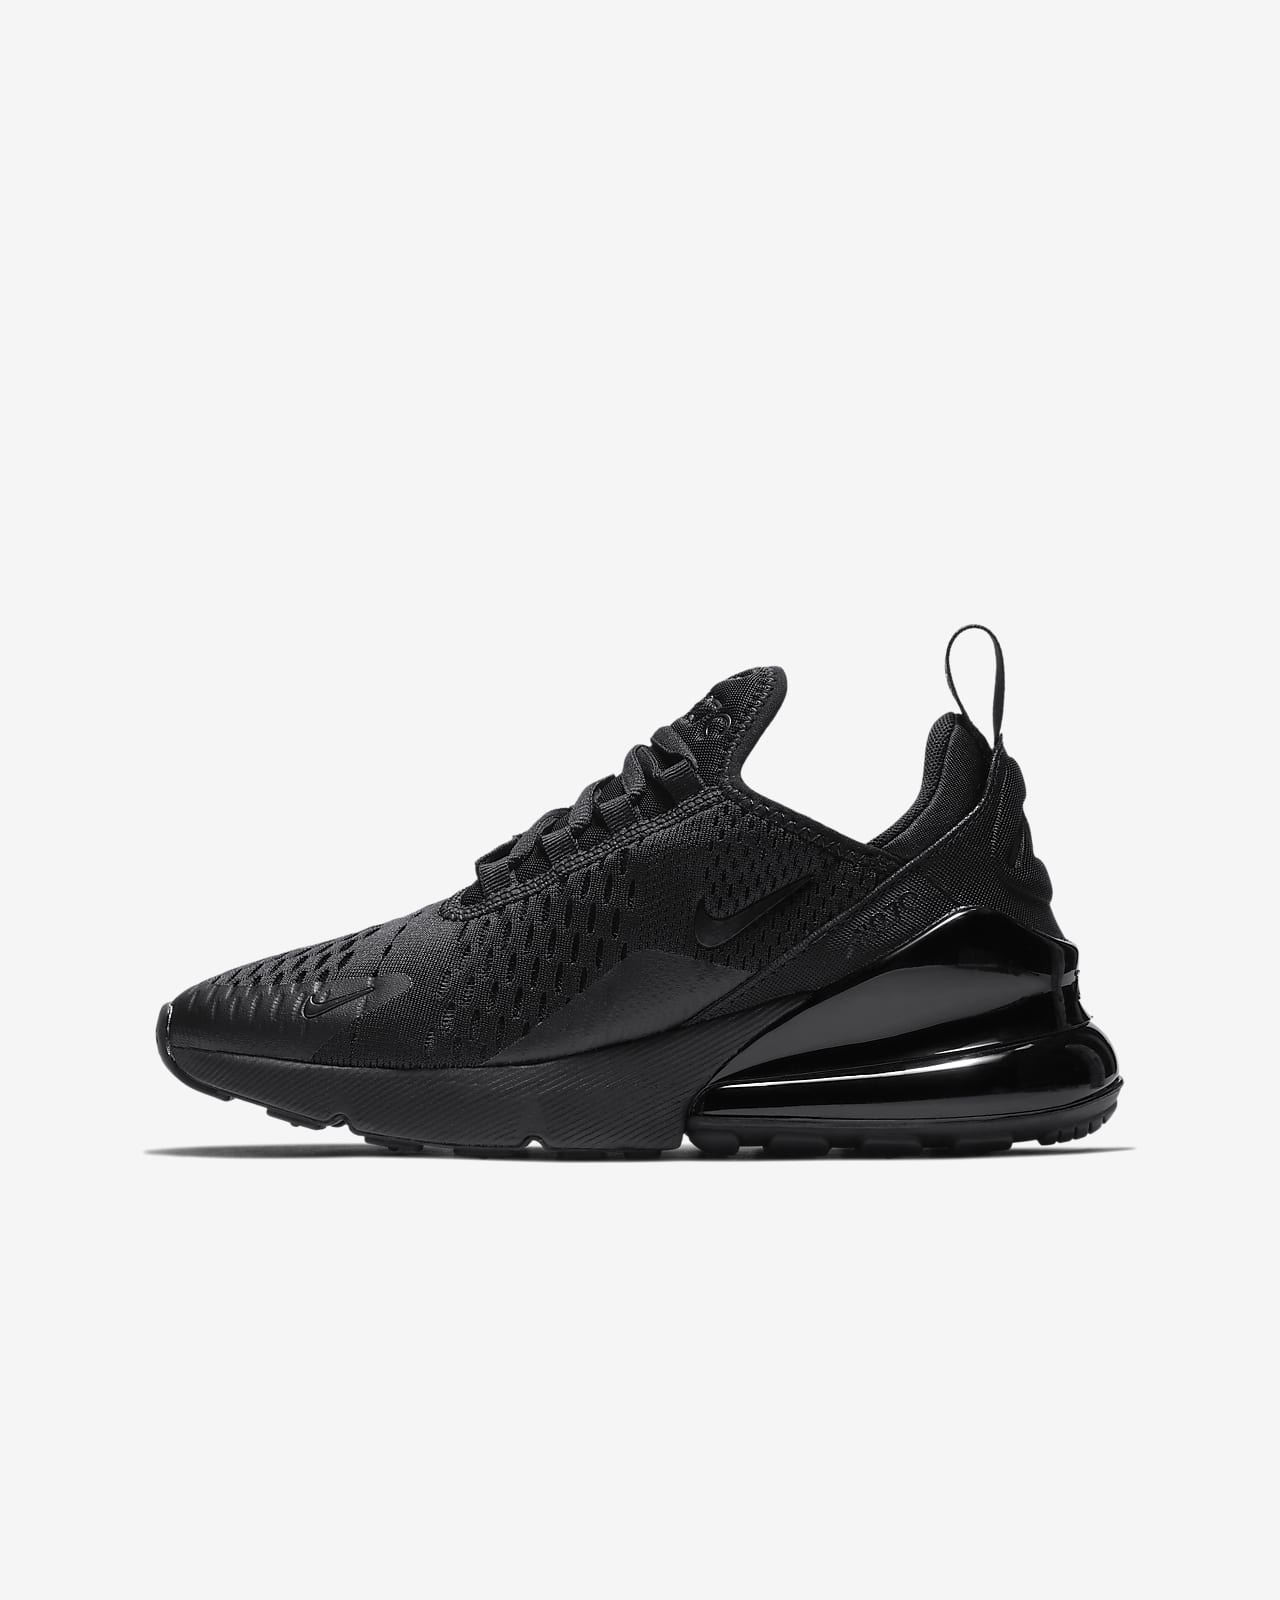 nike air max 270 youth size 6.5